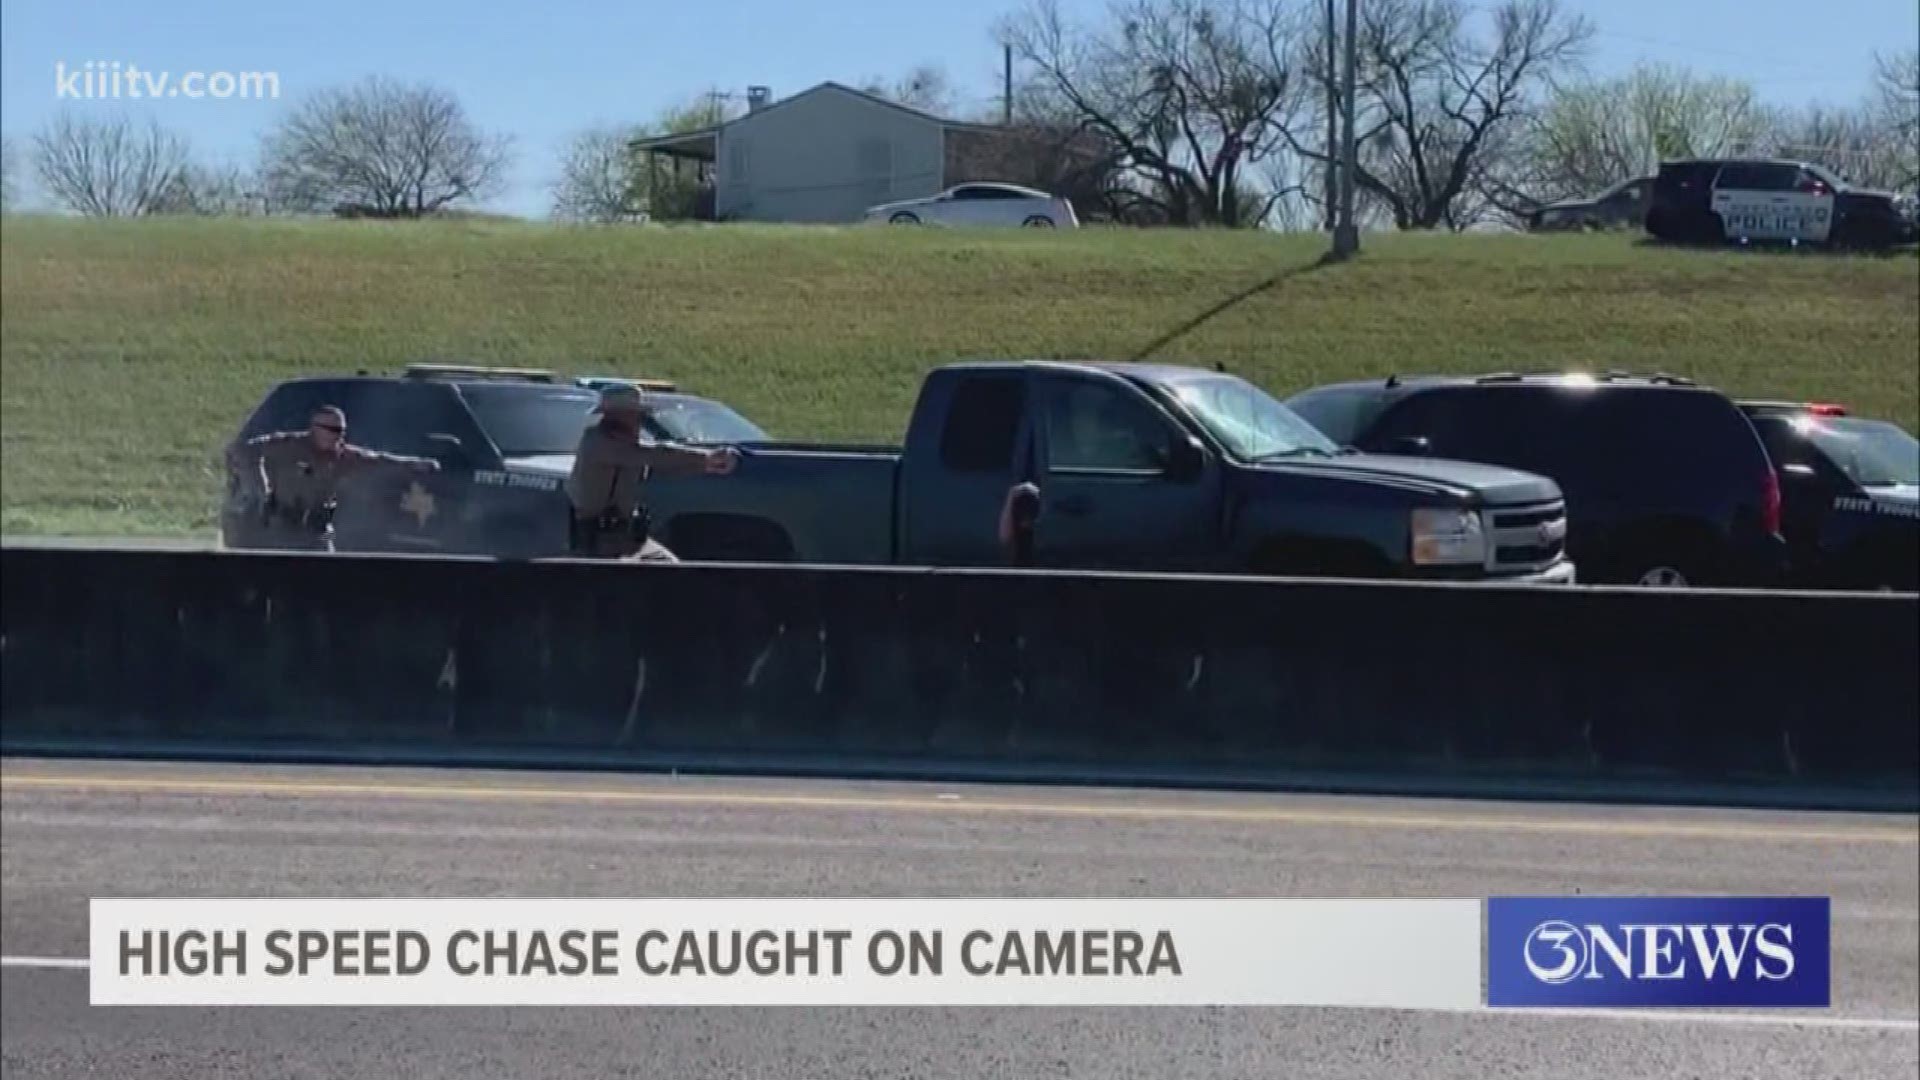 Driver in afternoon high speed chase identified